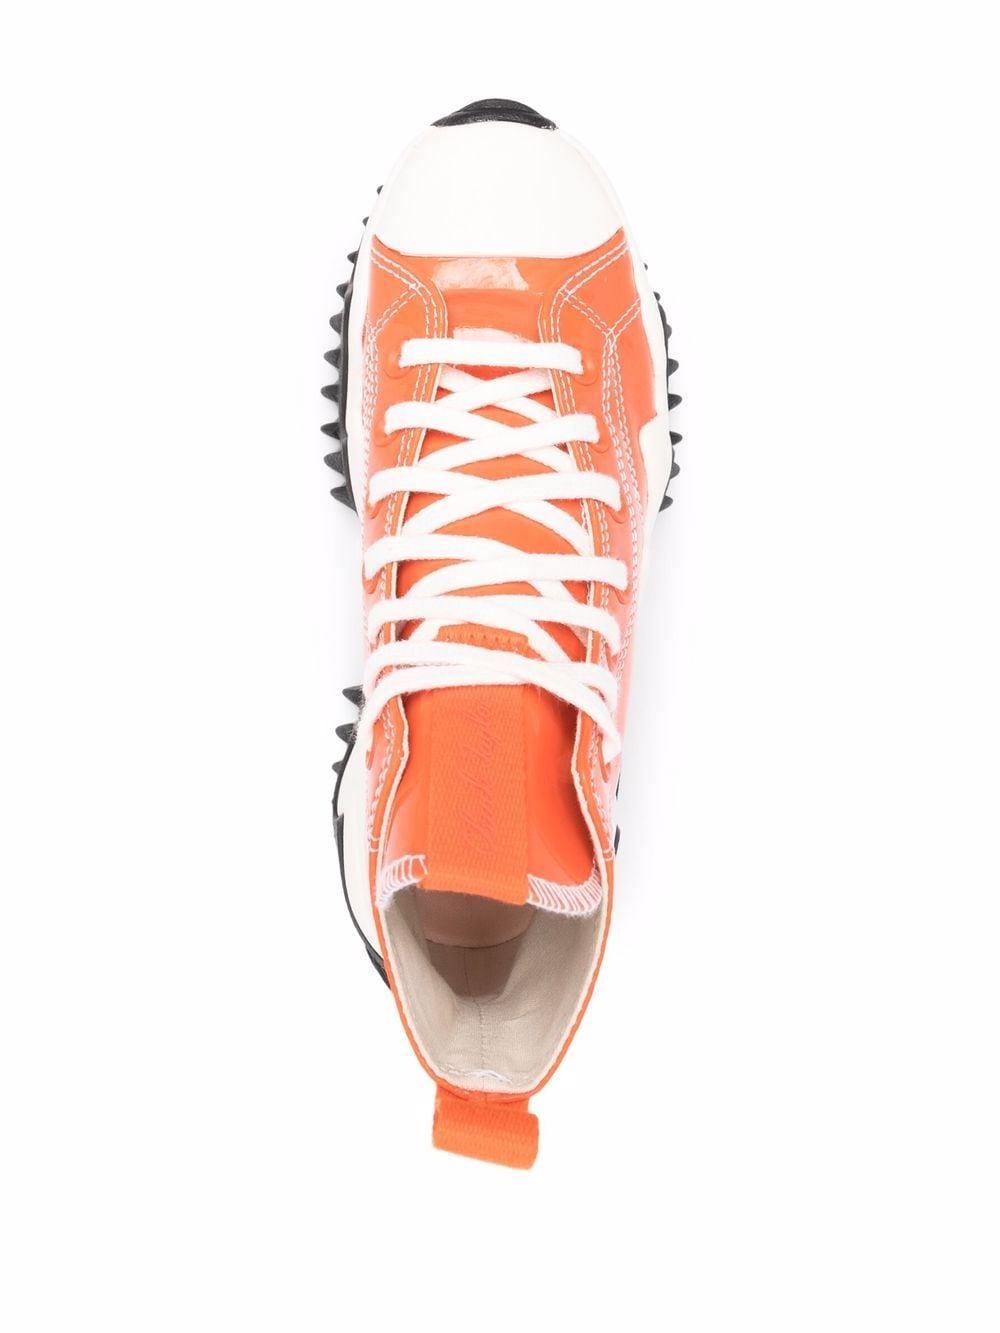 Converse Run Star Motion Hi sneakers in orange and pink - ShopStyle